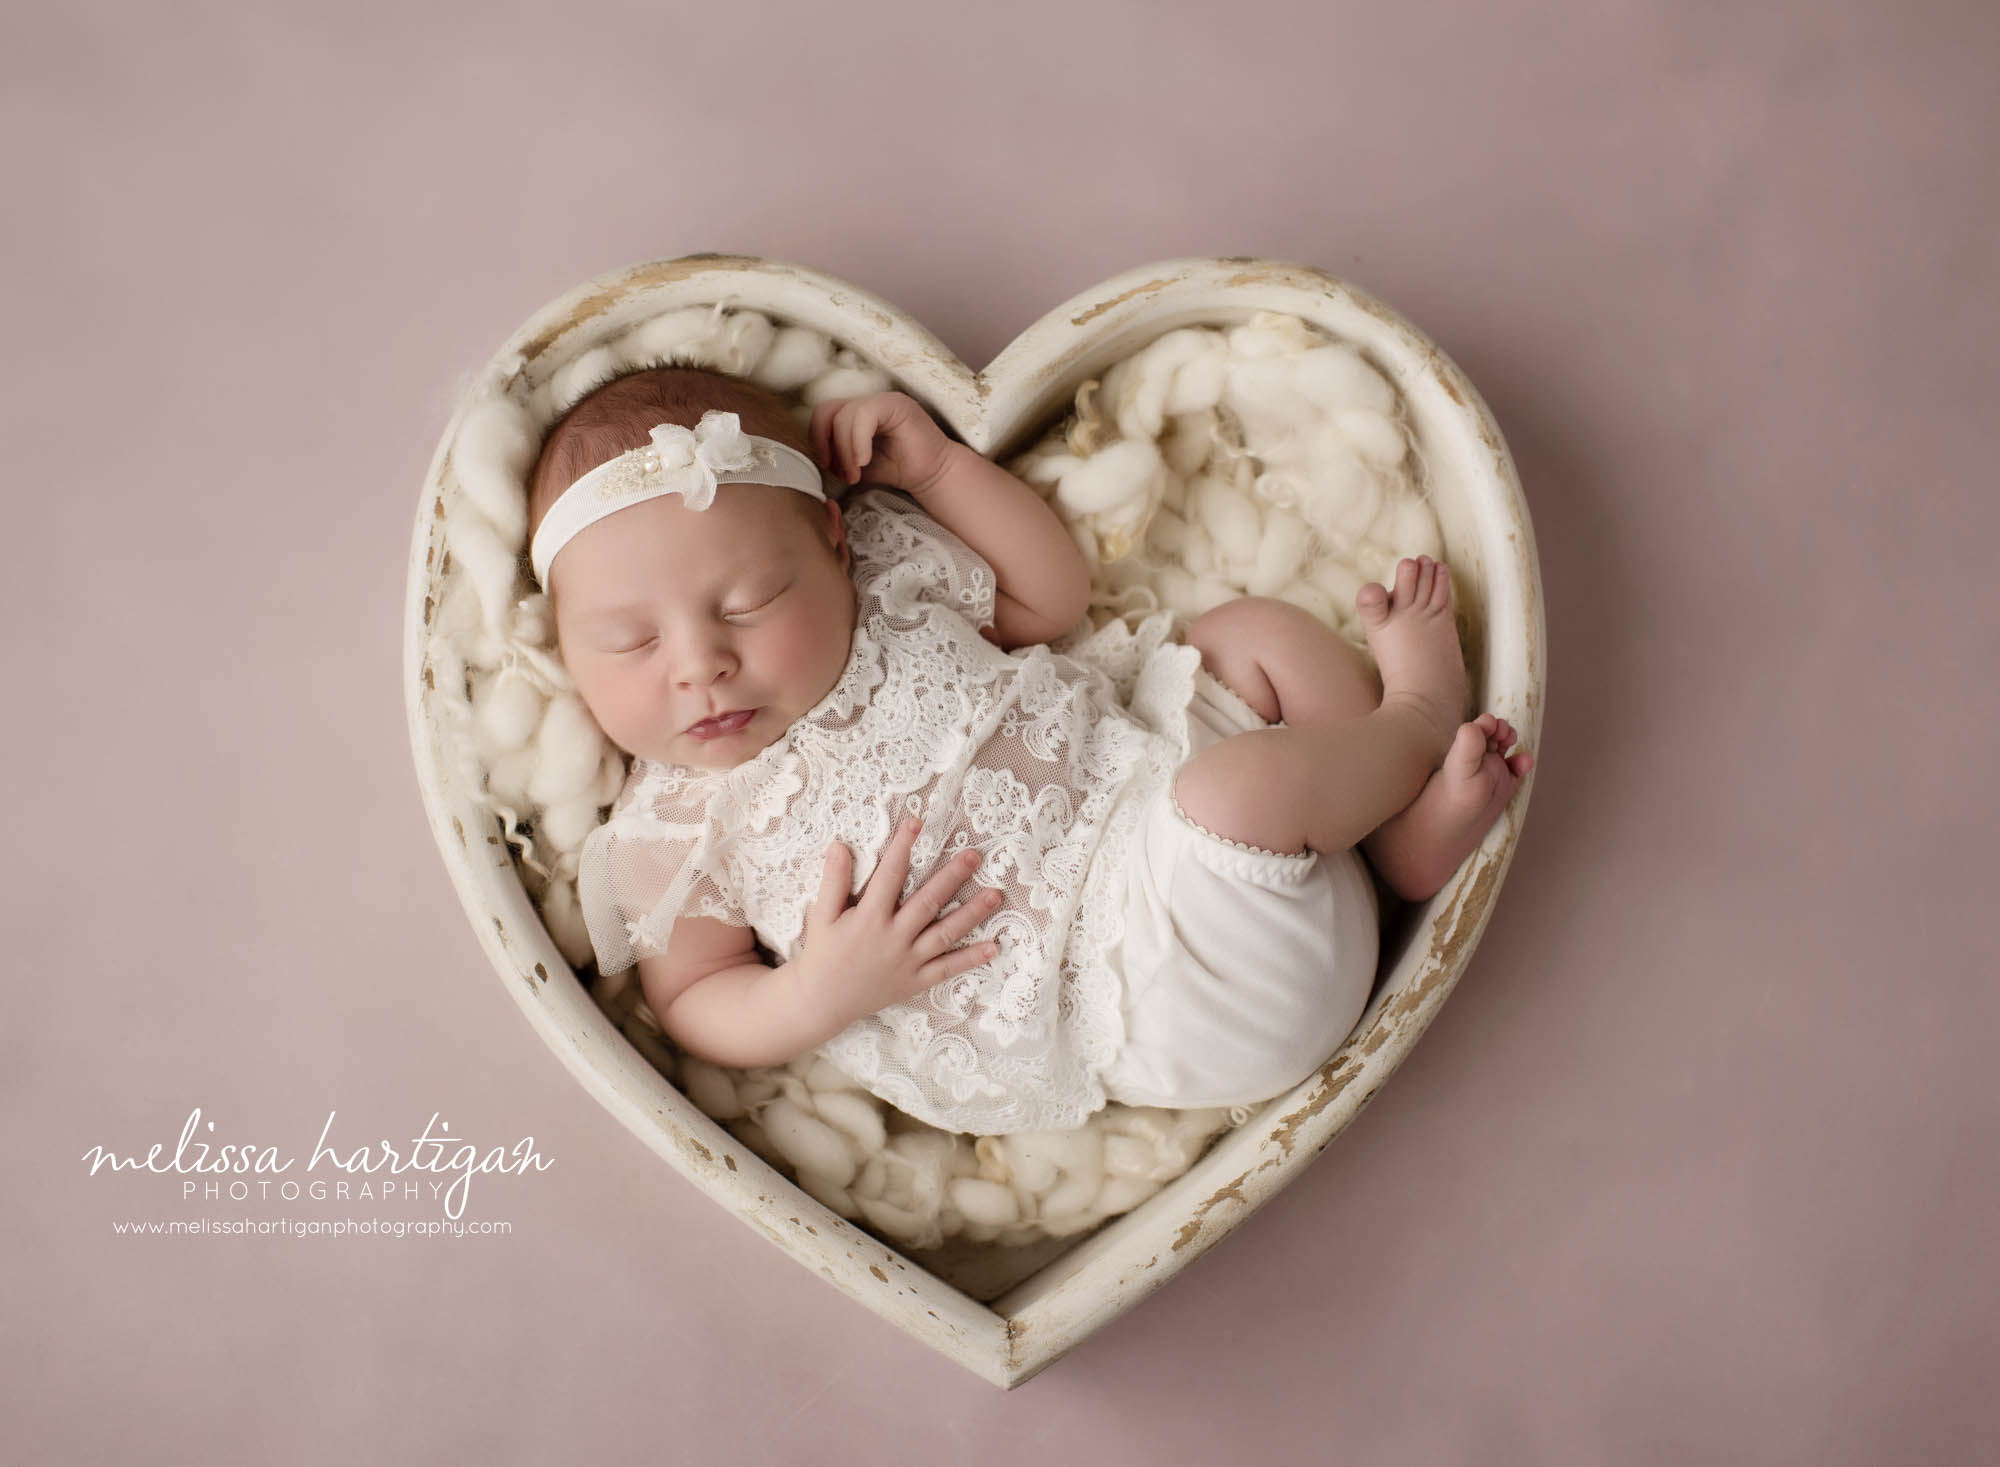 newborn baby girl wearing white lace outfit posed in wooden cream prop